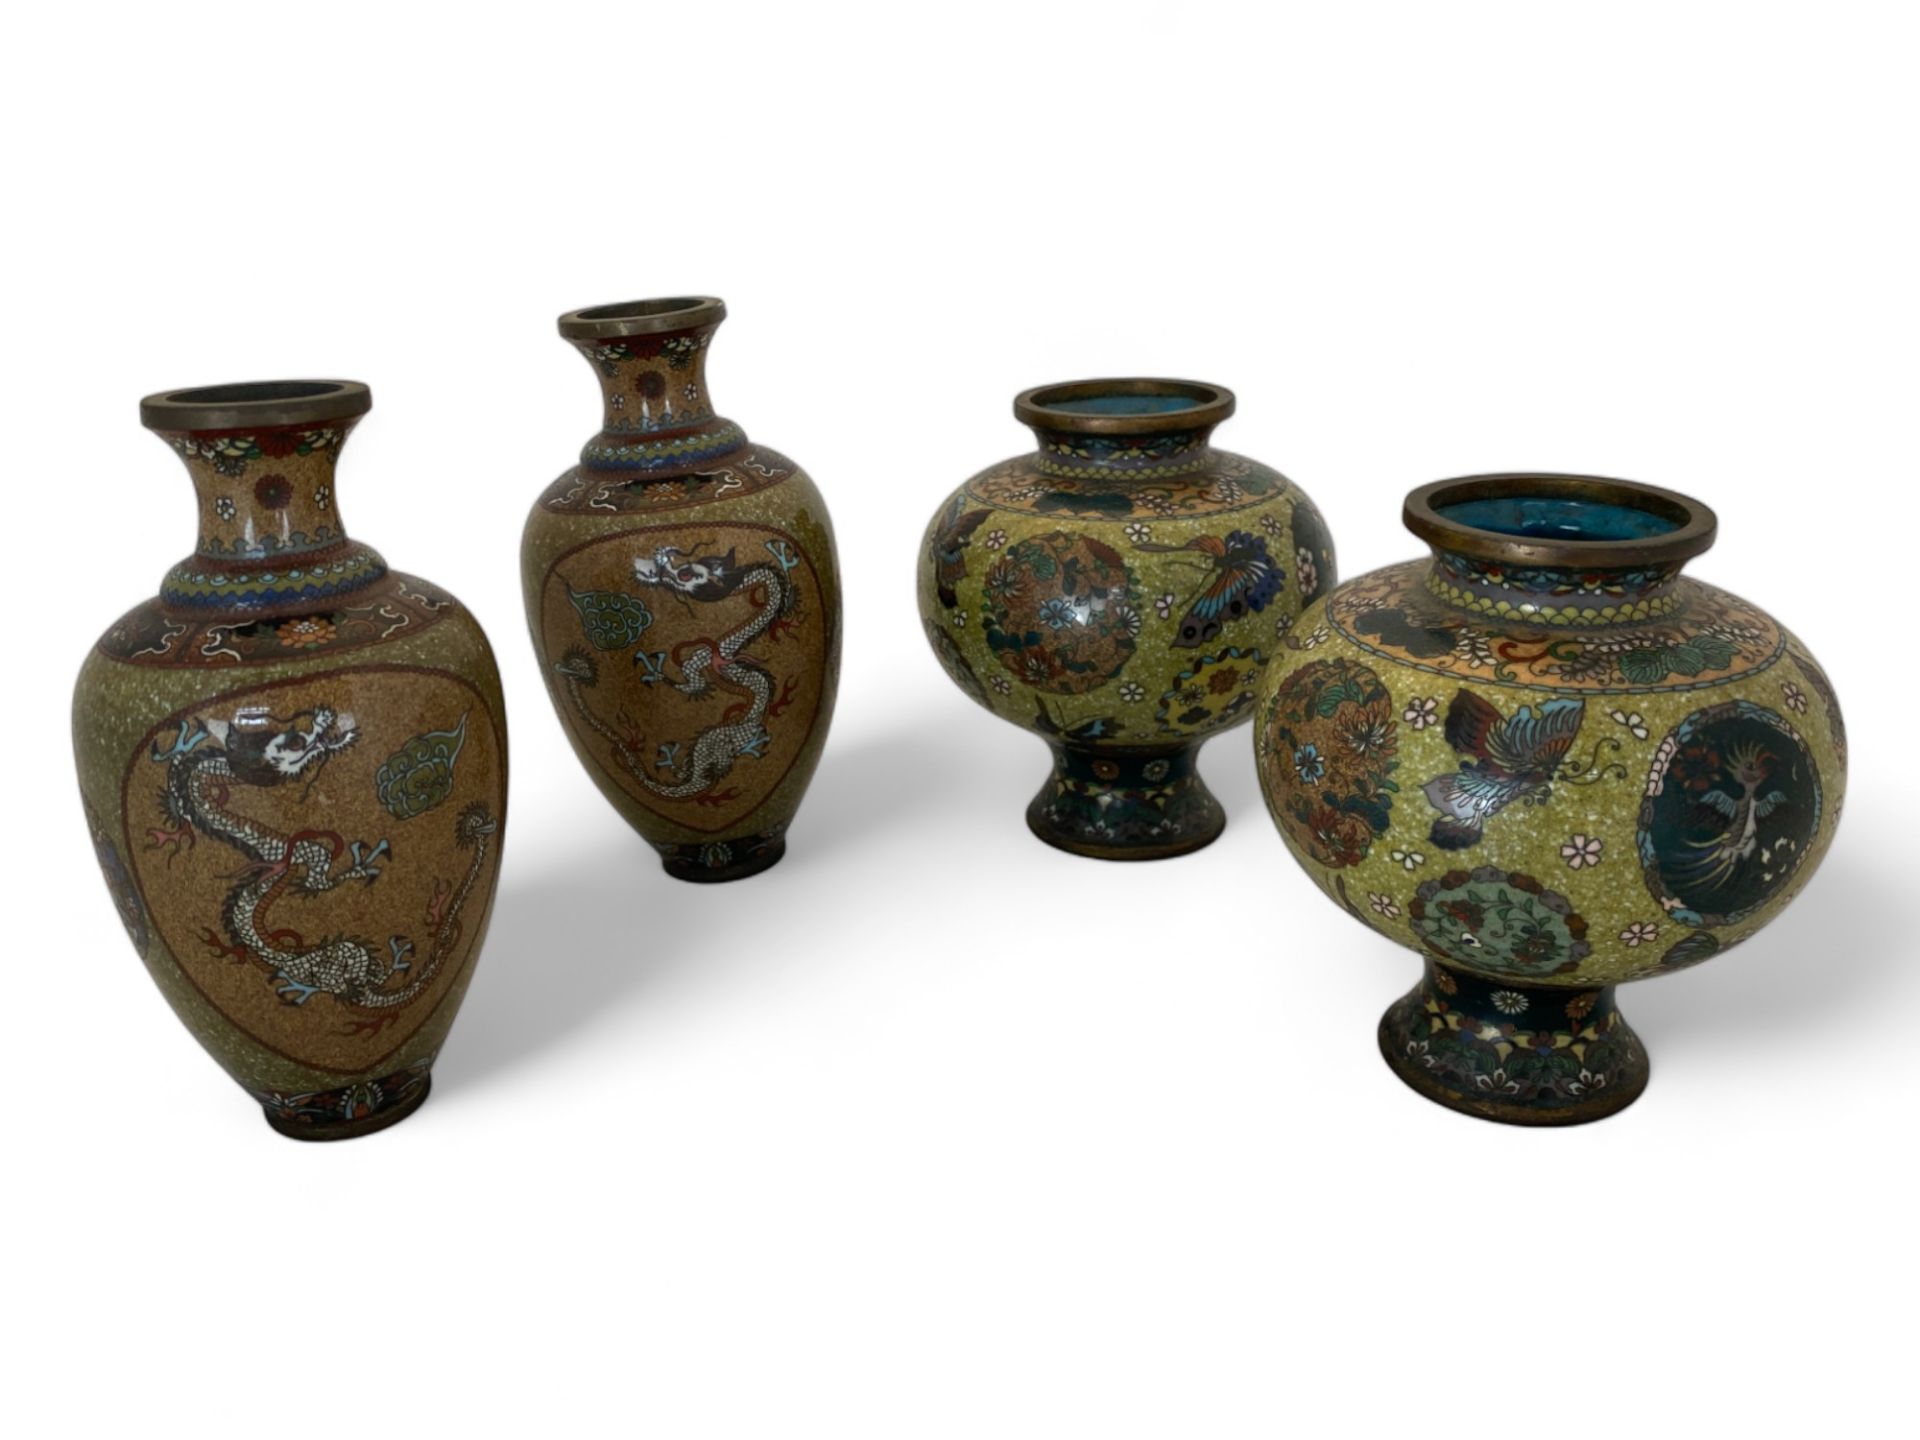 Two pairs of late 19th/early 20th century small cloisonné vases - Image 2 of 5